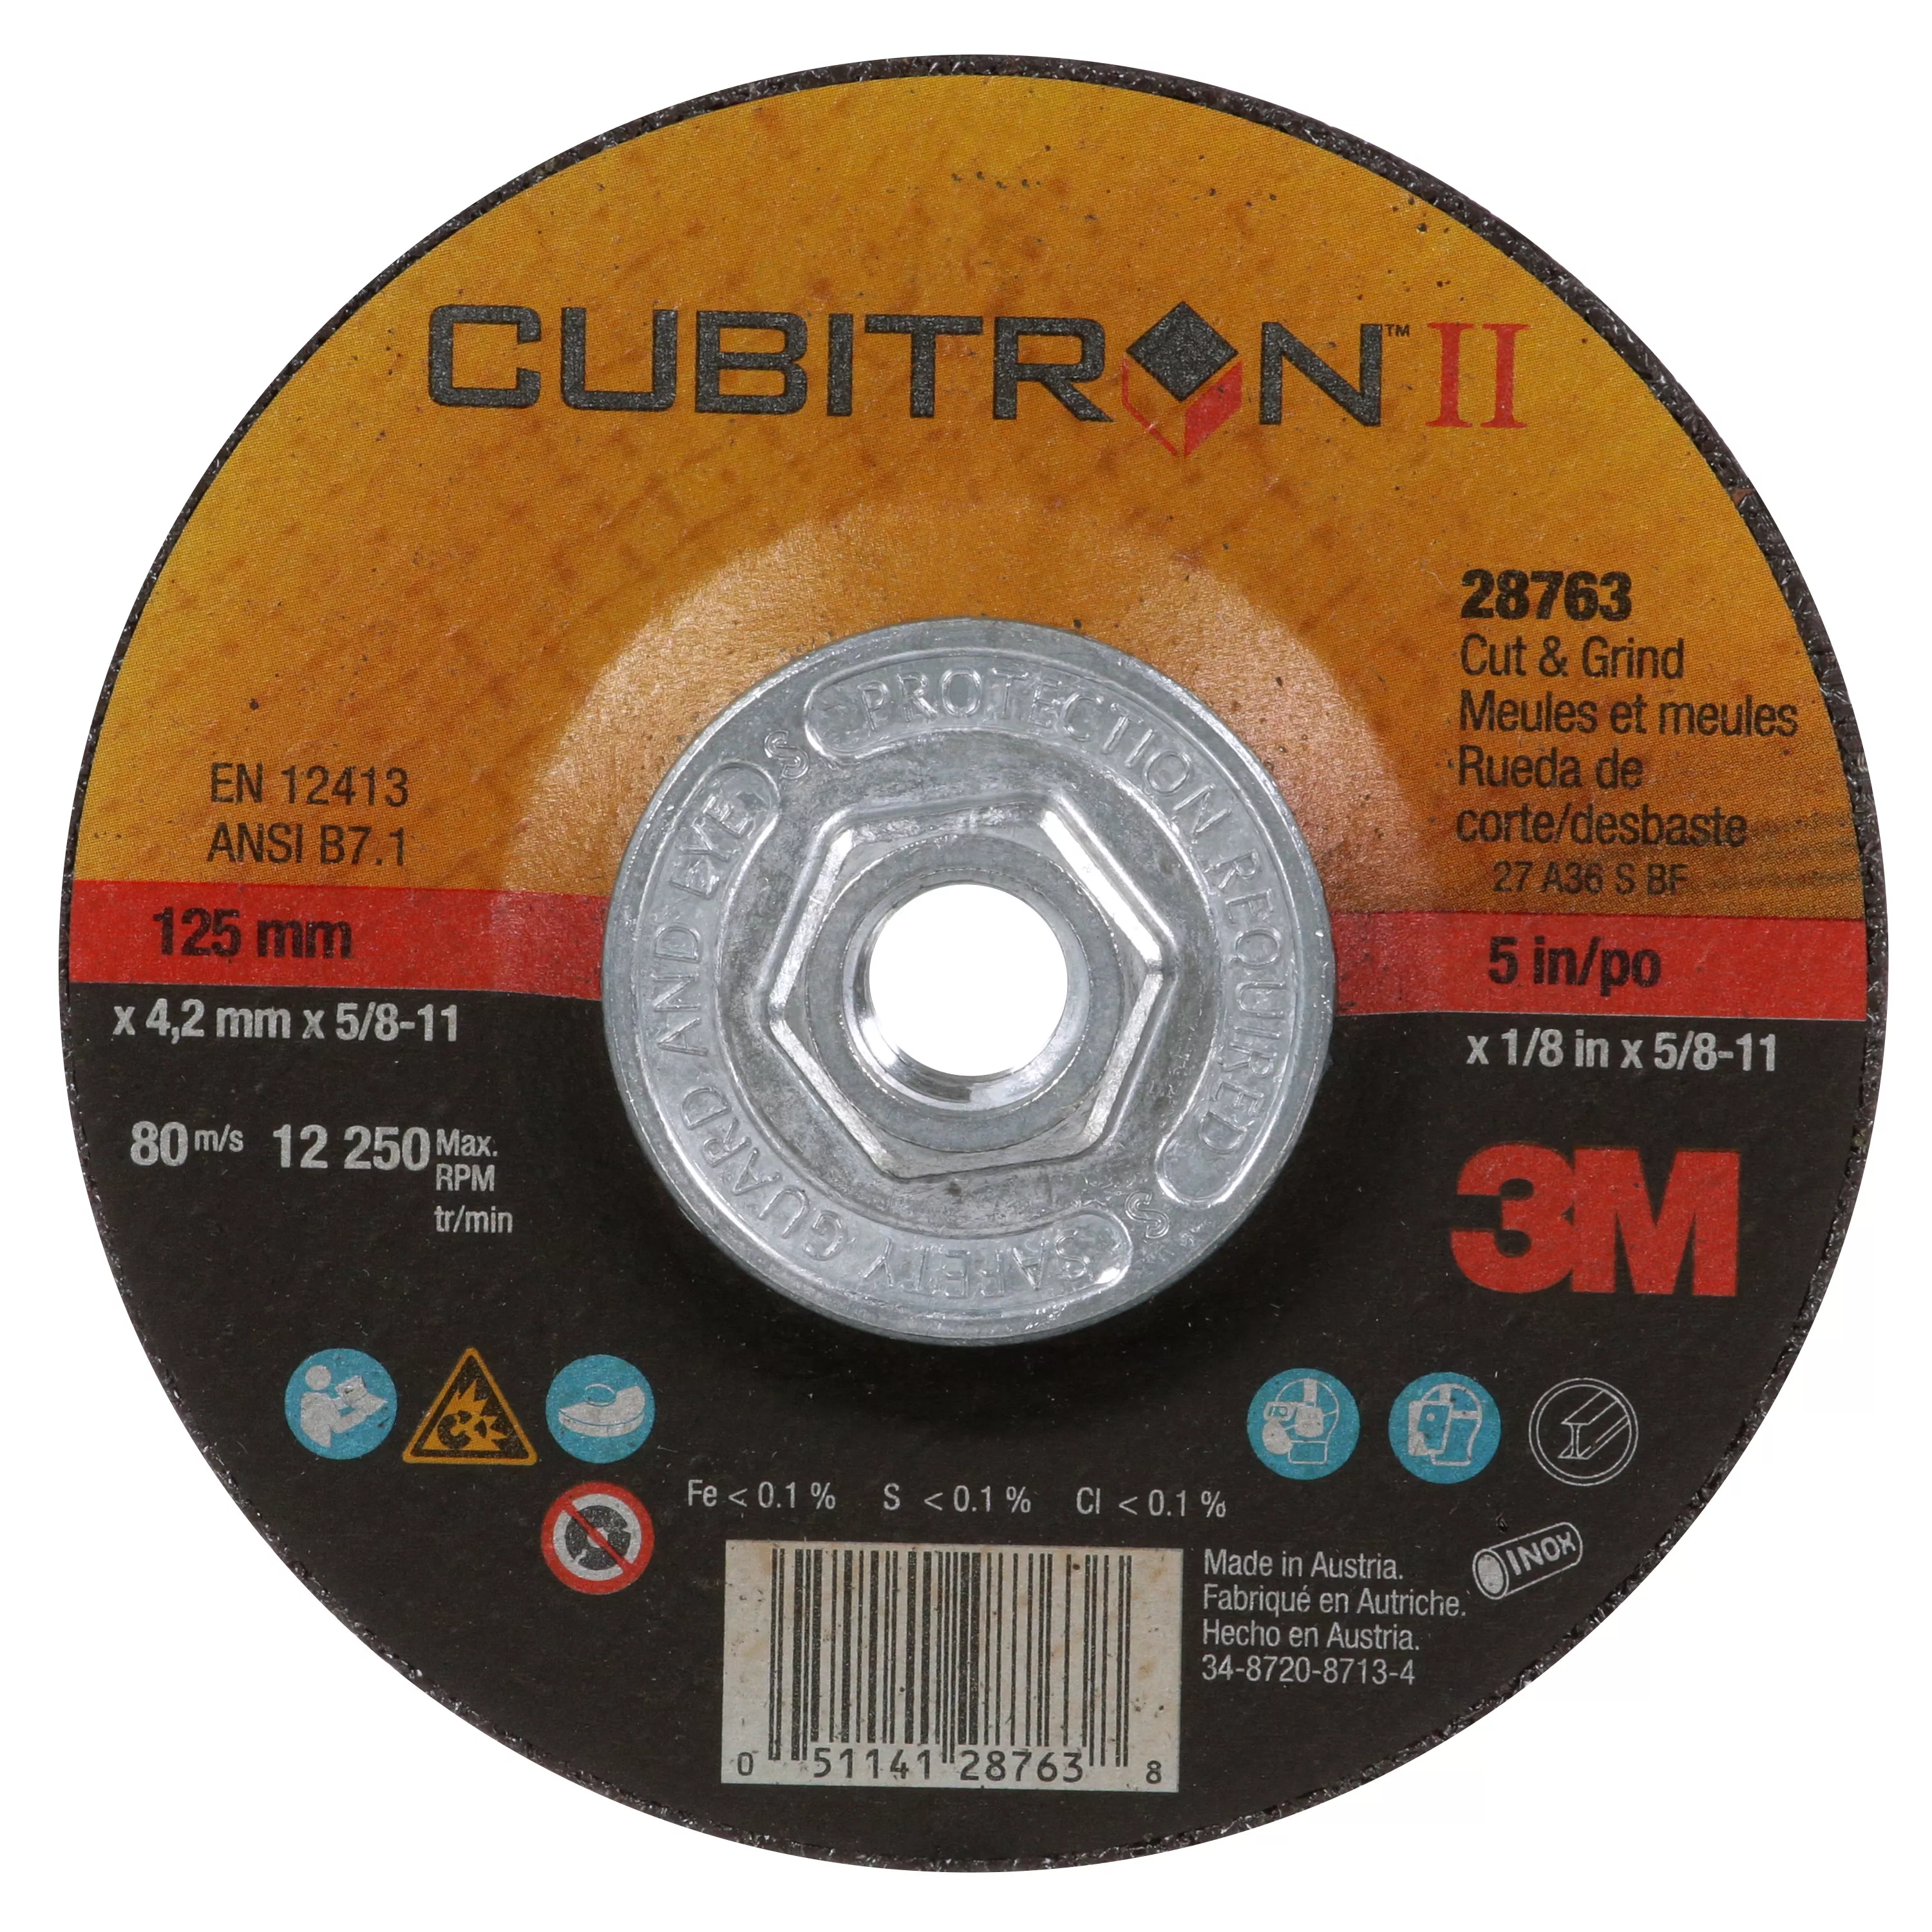 3M™ Cubitron™ II Cut and Grind Wheel, 28763, Type 27 Quick Change, 5 in
x 1/8 in x 5/8 in-11, 10/Carton, 20 ea/Case